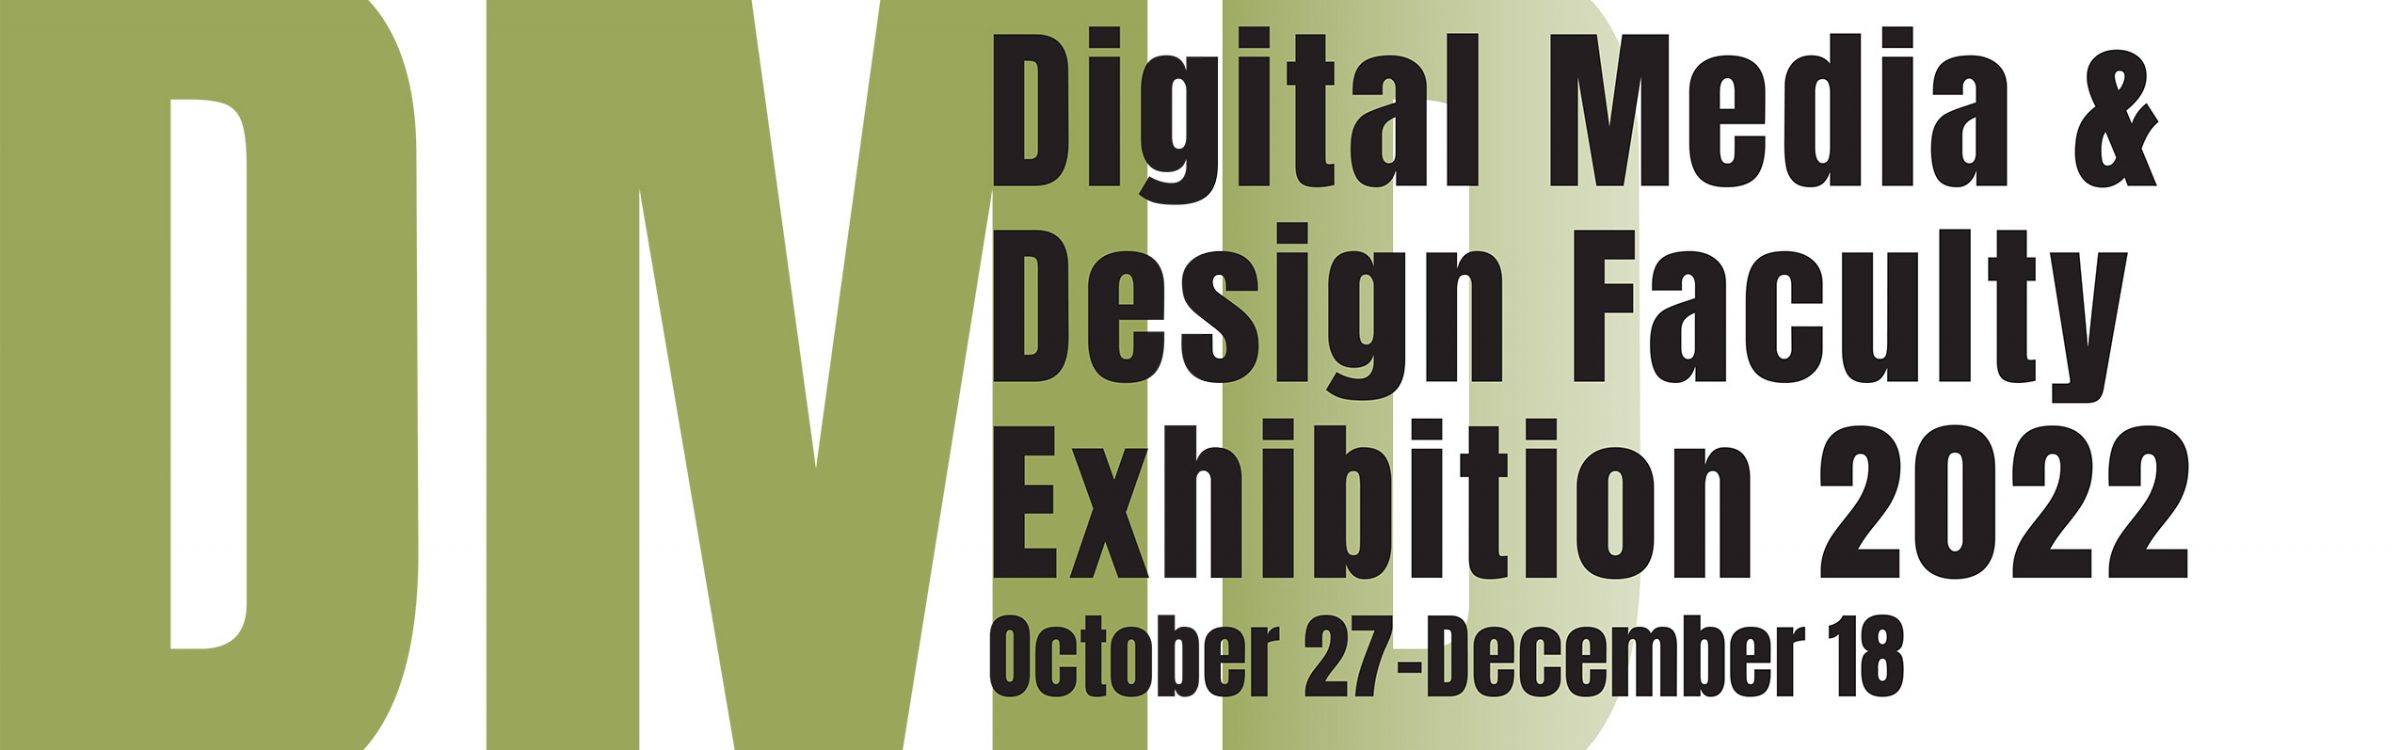 Web banner with large green text describing the Digital Media and Design Faculty Exhibition 2022